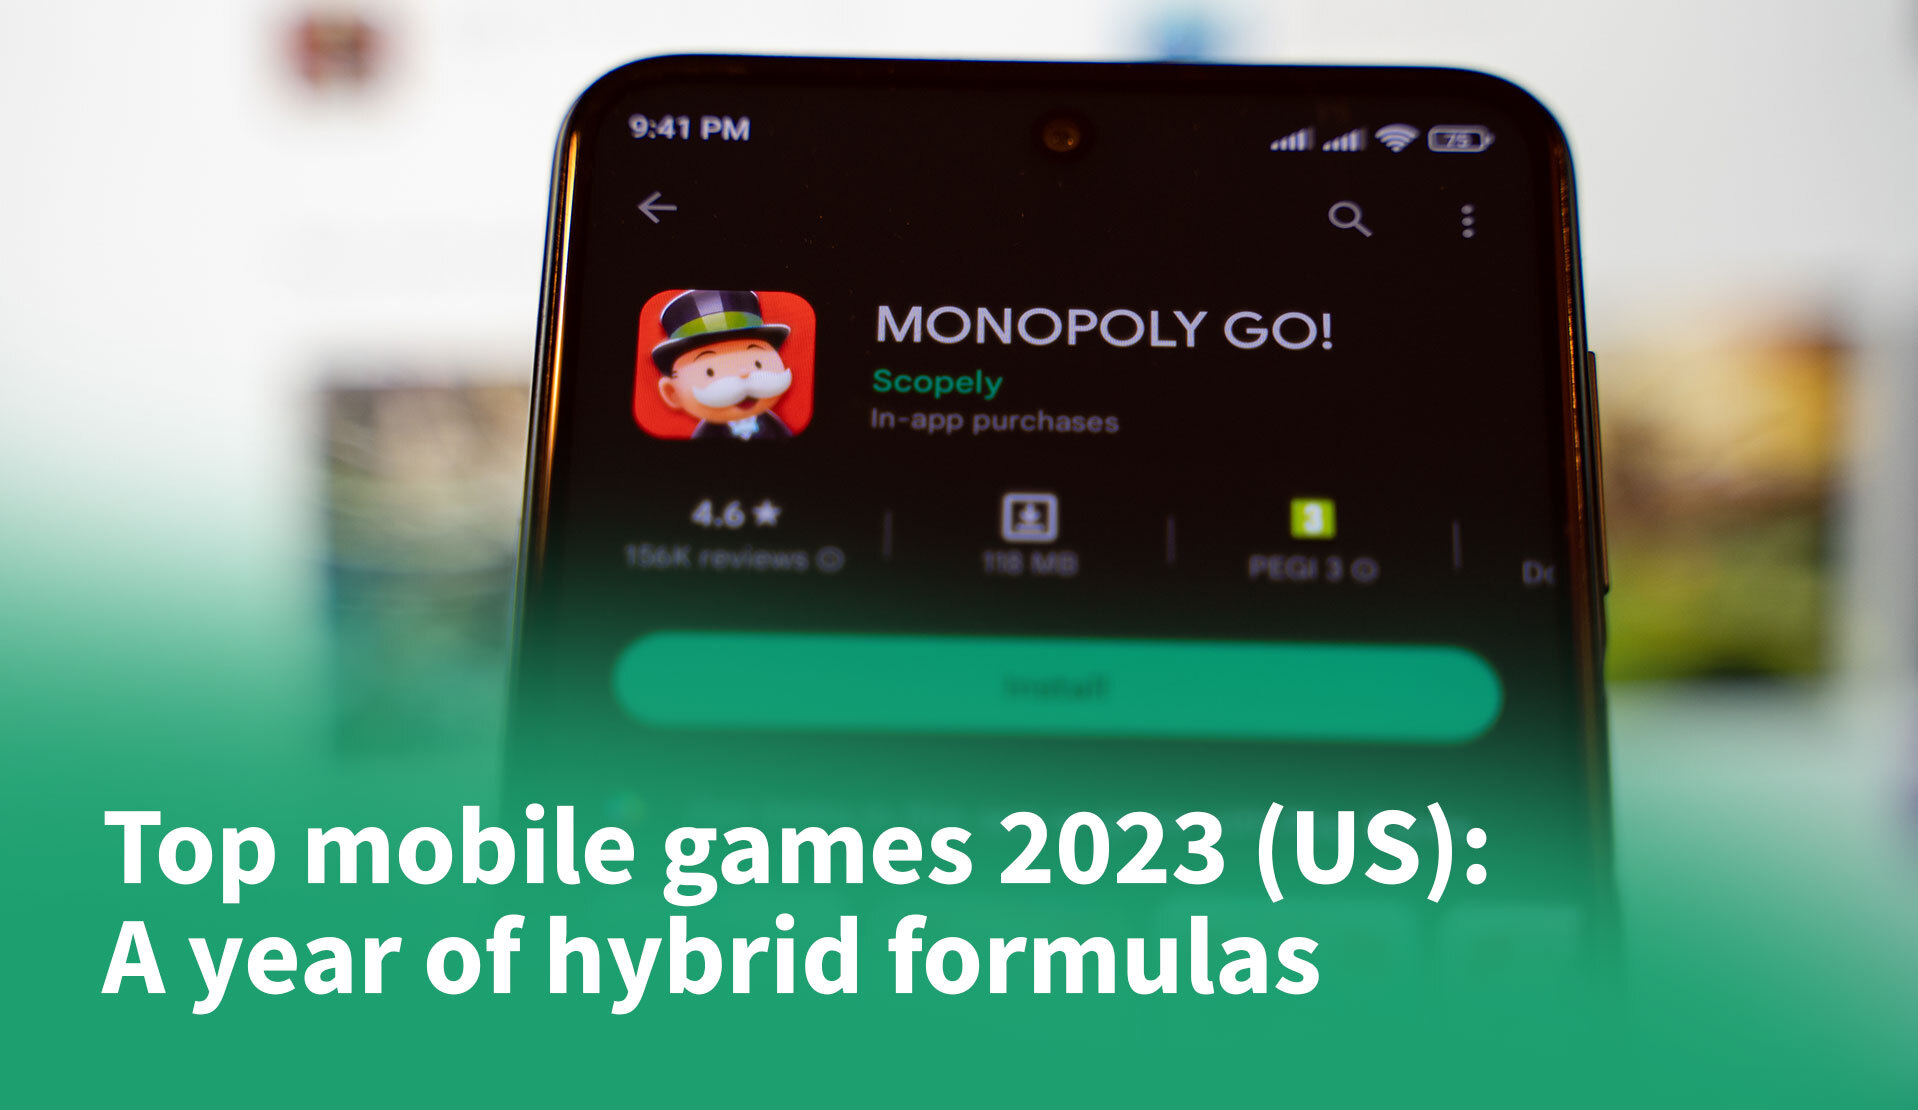 Top mobile games 2023 (US)